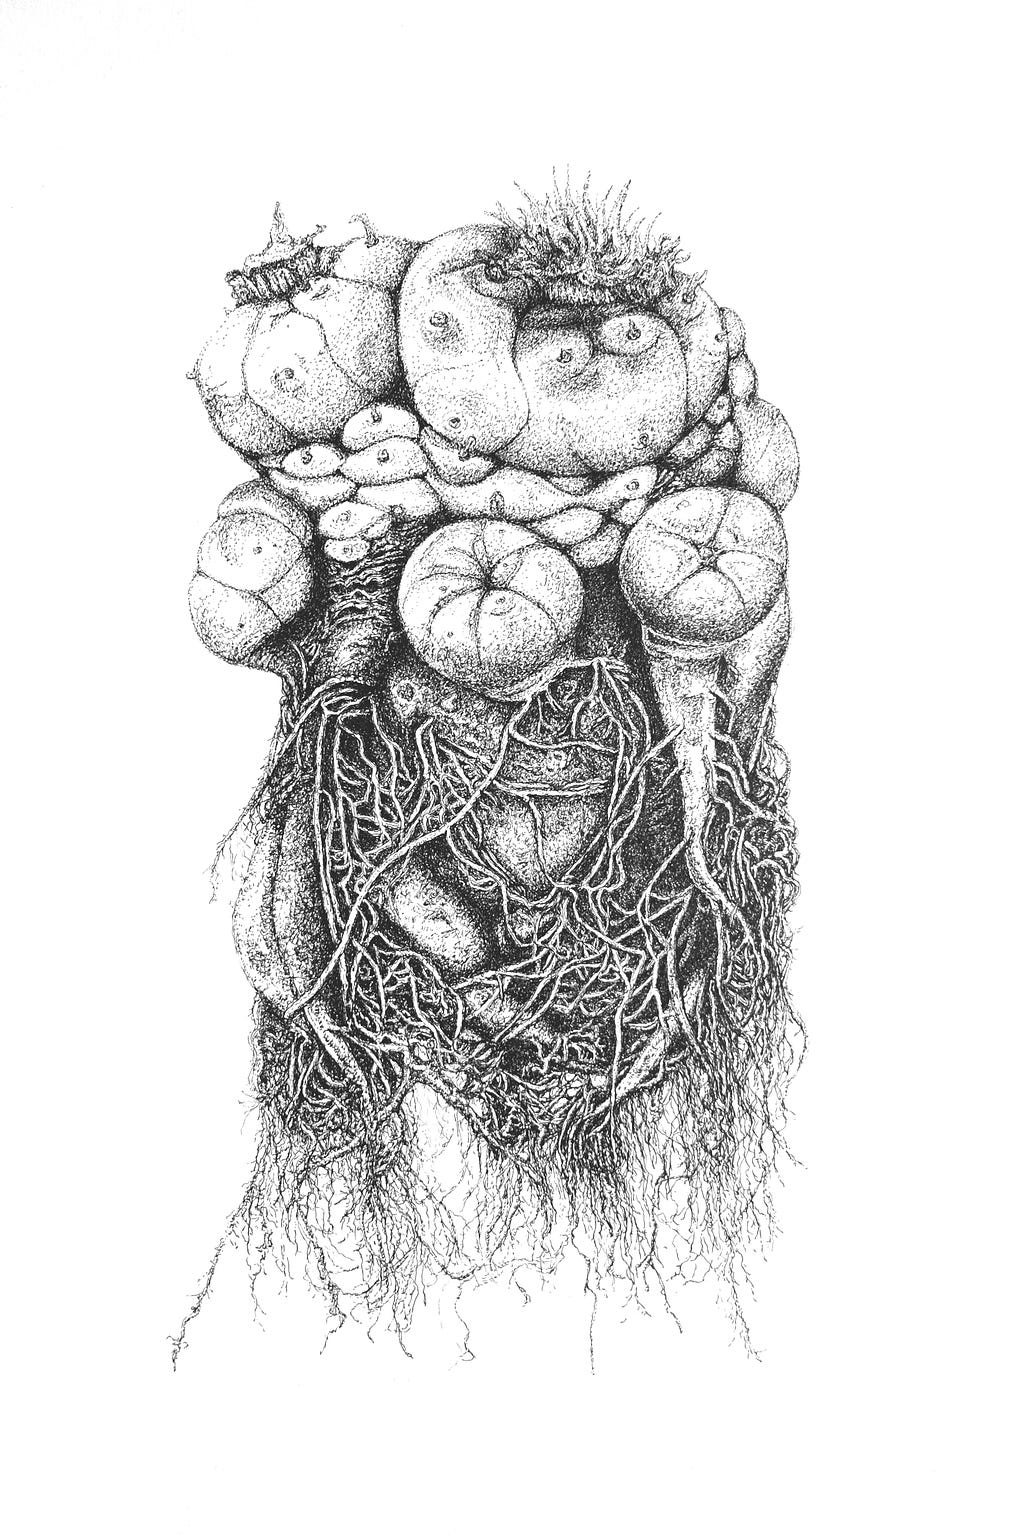 Black and white drawing of a Peyote cactus plant with a very intense tangled root system –– crated entirely with thousands of dots to make up the plant.